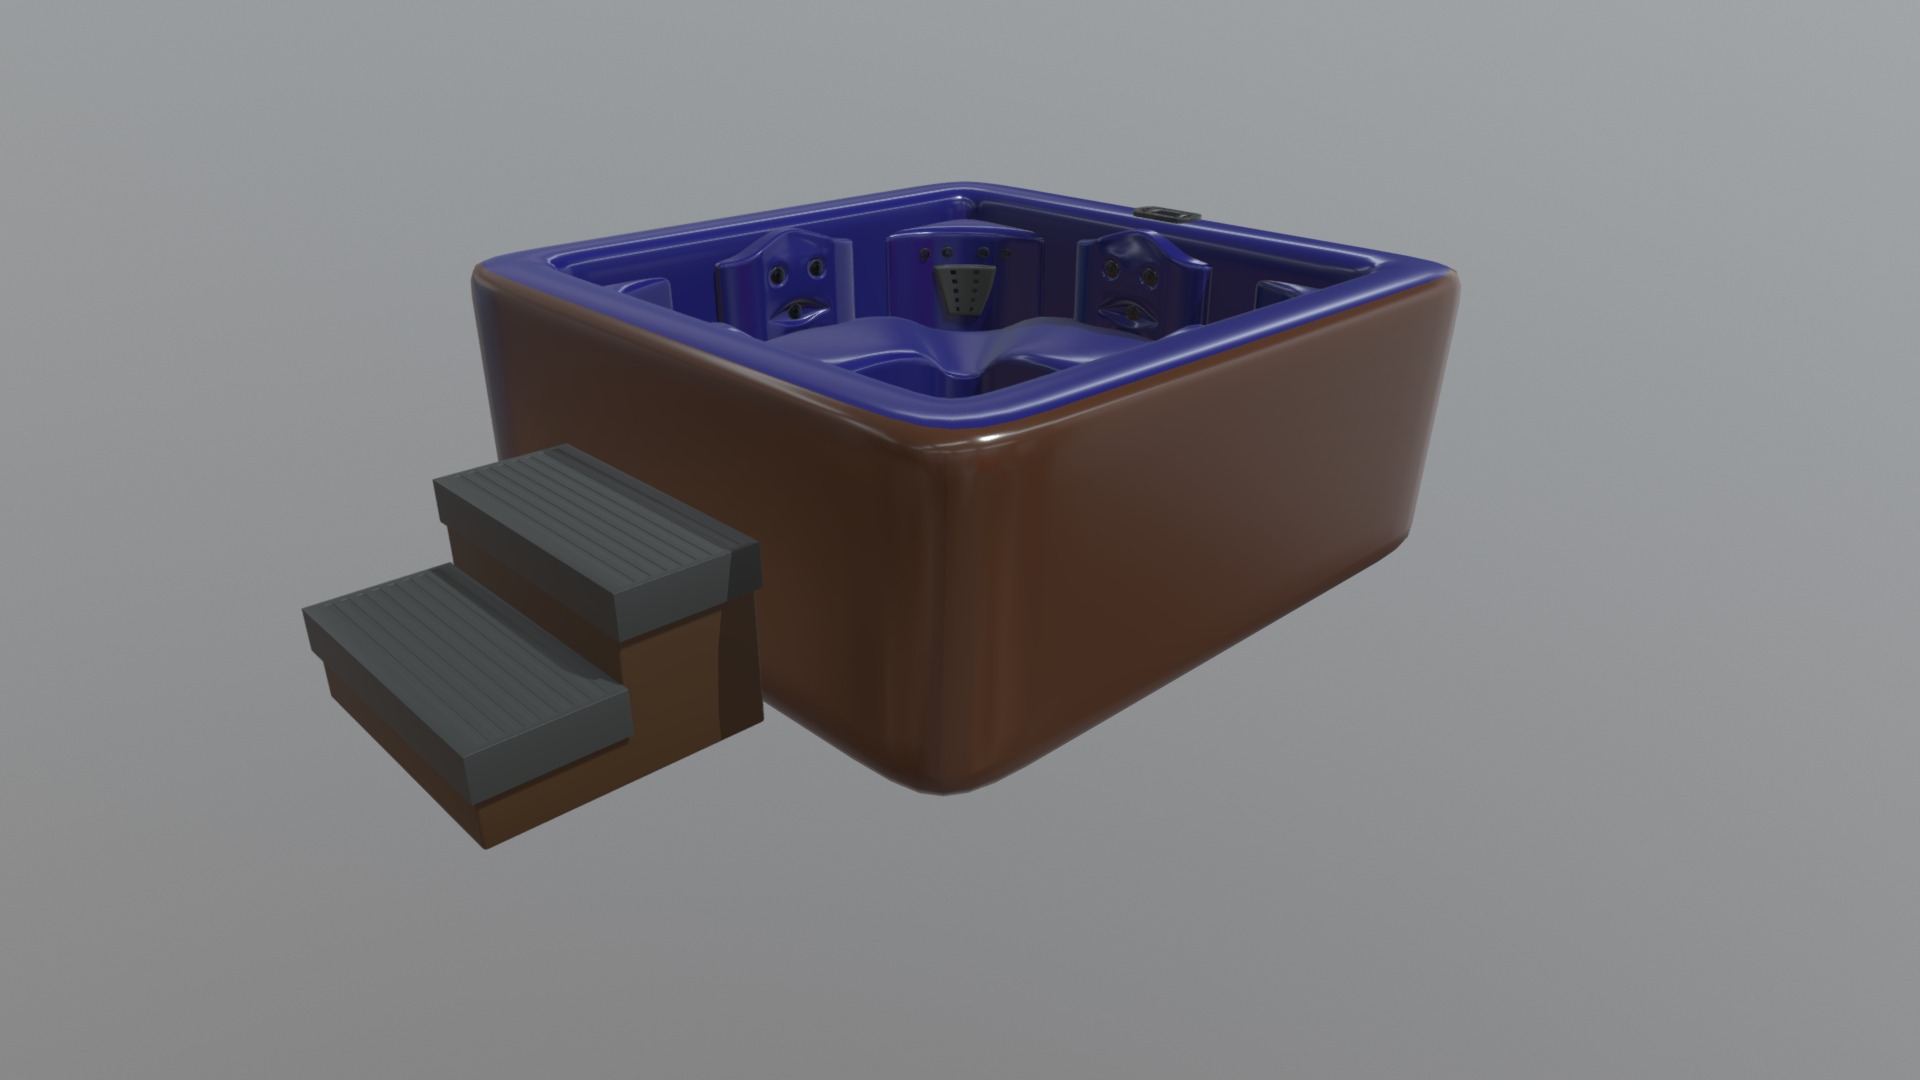 3D model Simple Hot Tub With Steps - This is a 3D model of the Simple Hot Tub With Steps. The 3D model is about a blue and purple game console.